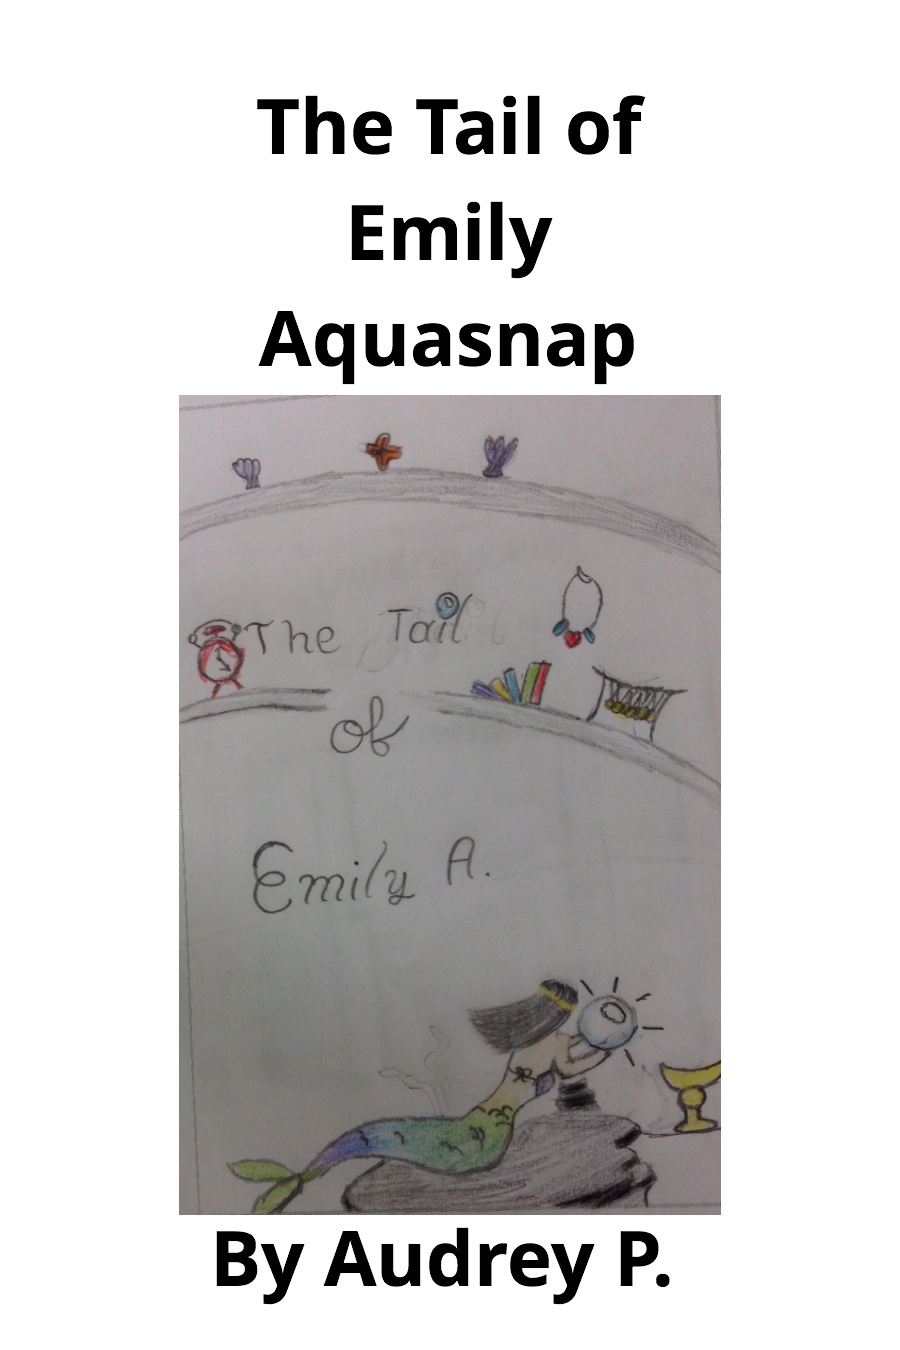 The Tail of Emily A by Audrey P